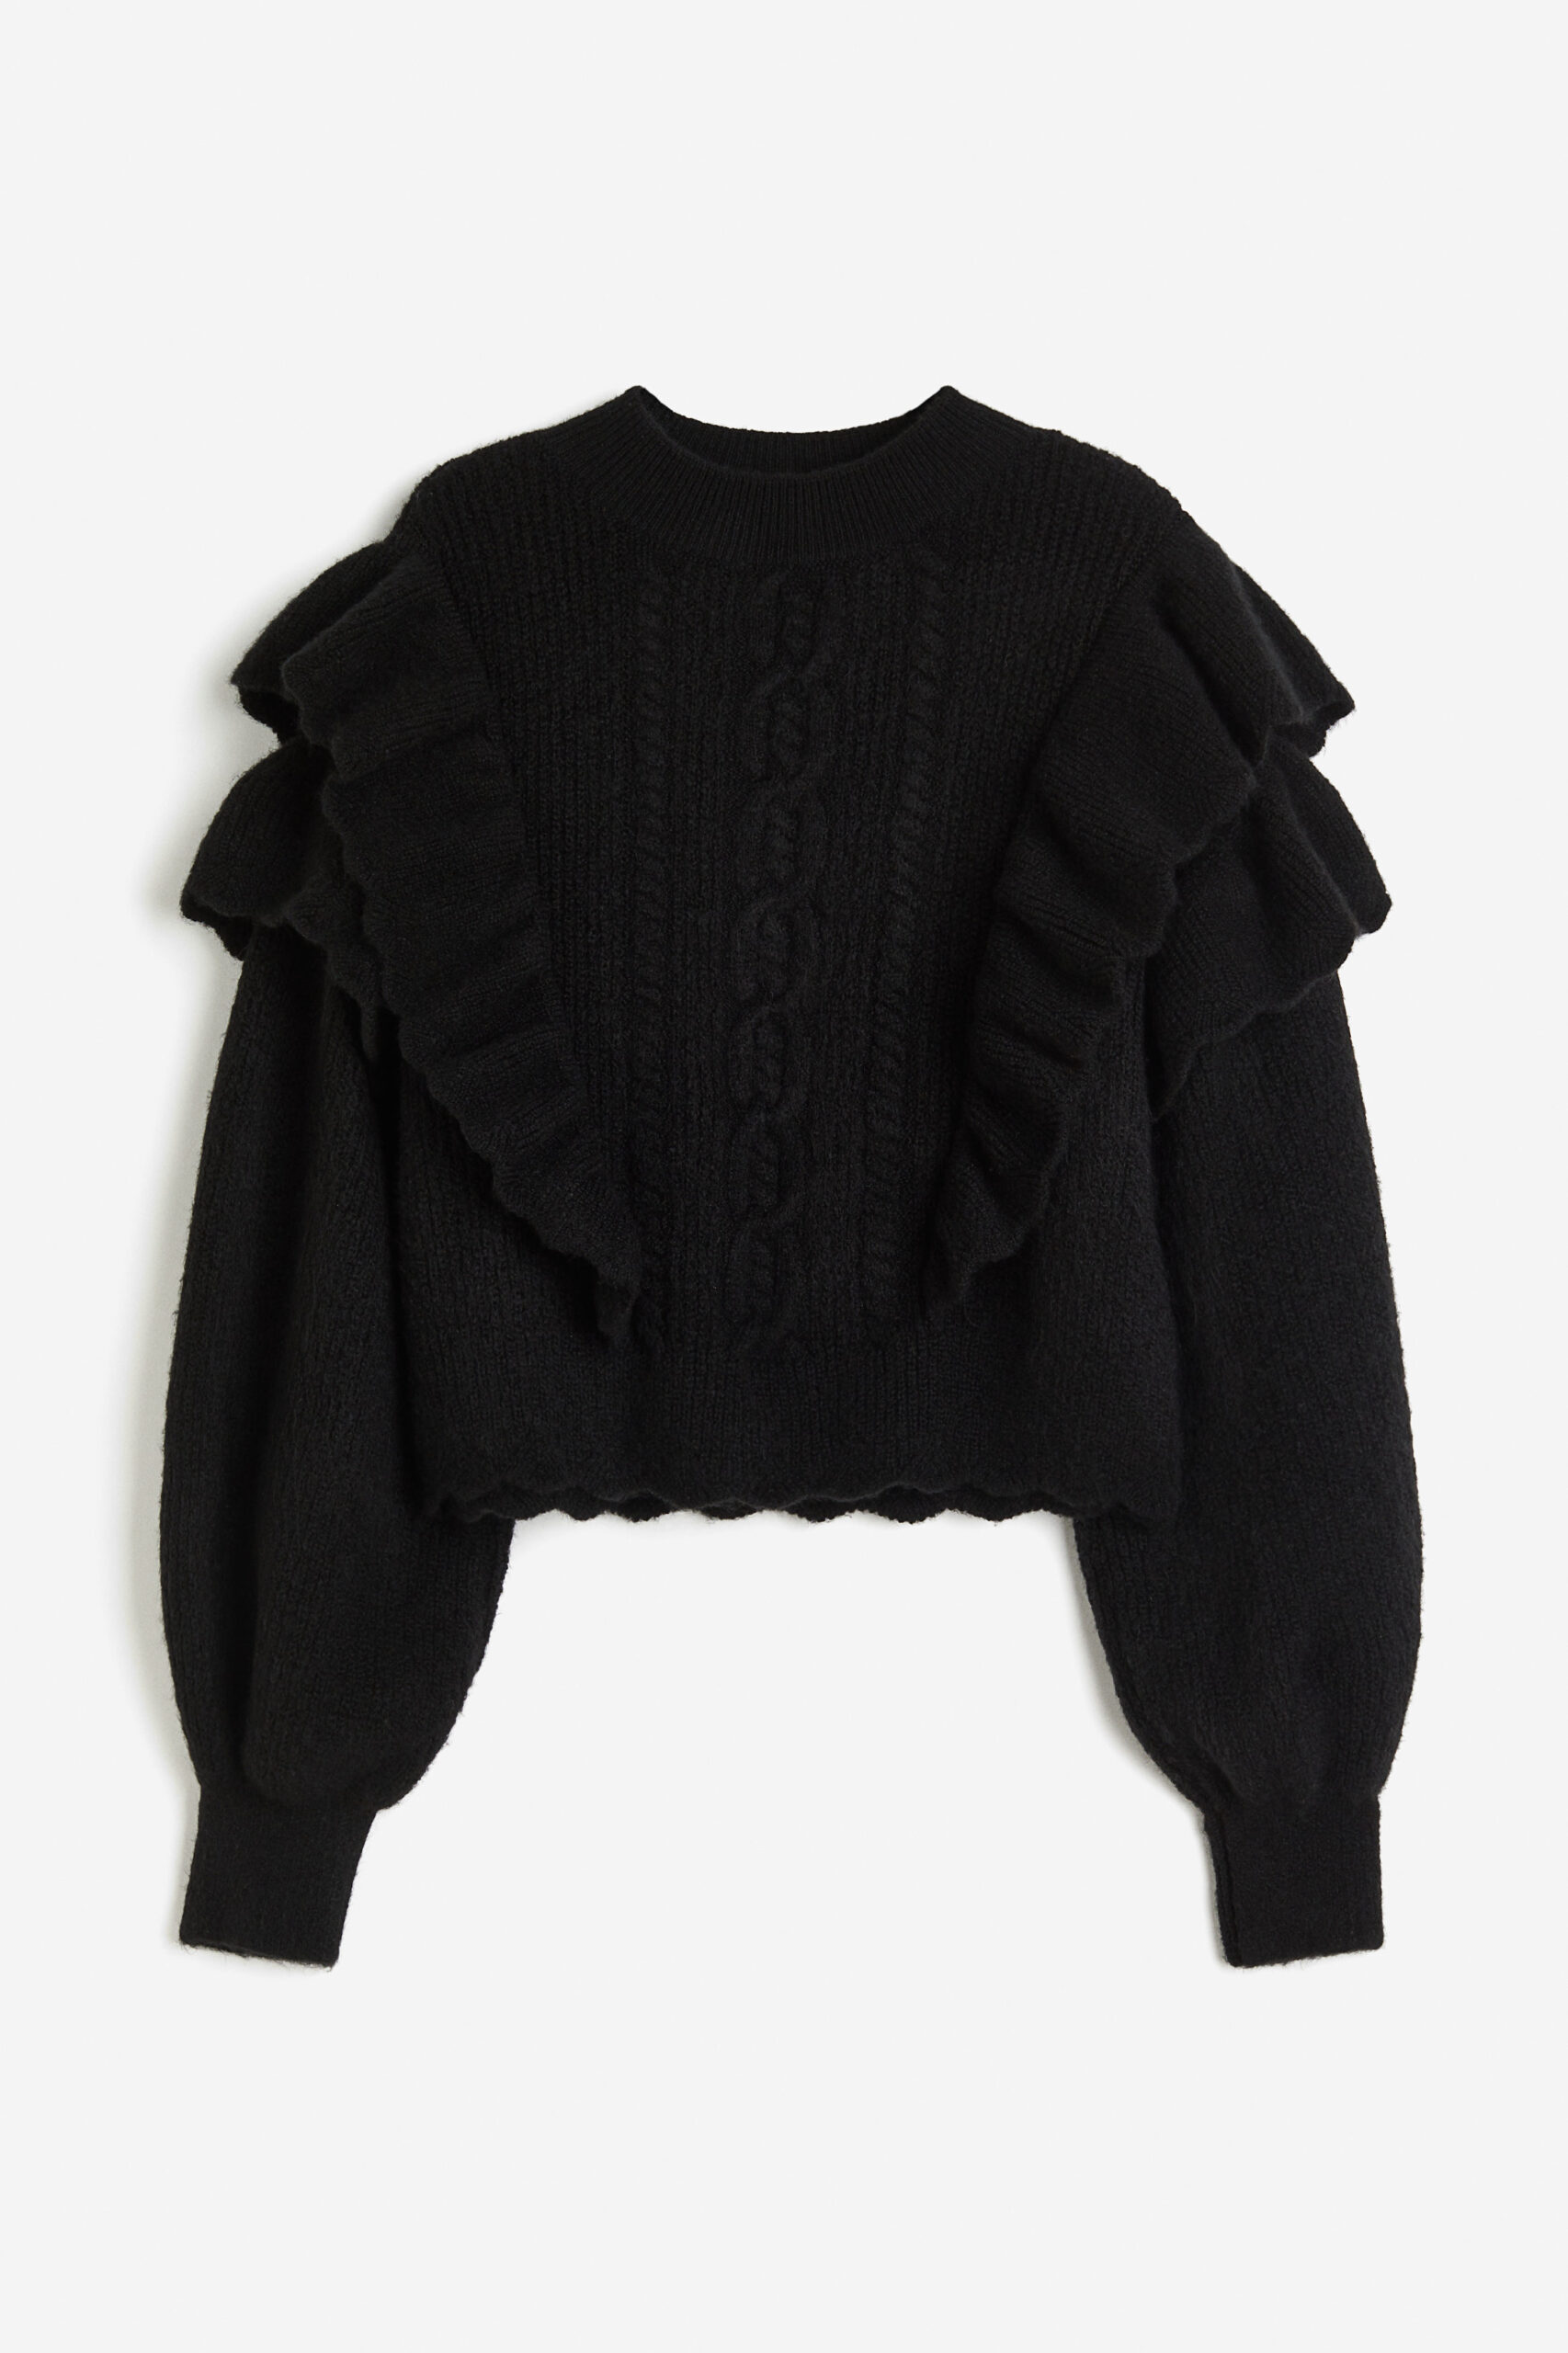 Black knit sweater with ruffles on sleeves.